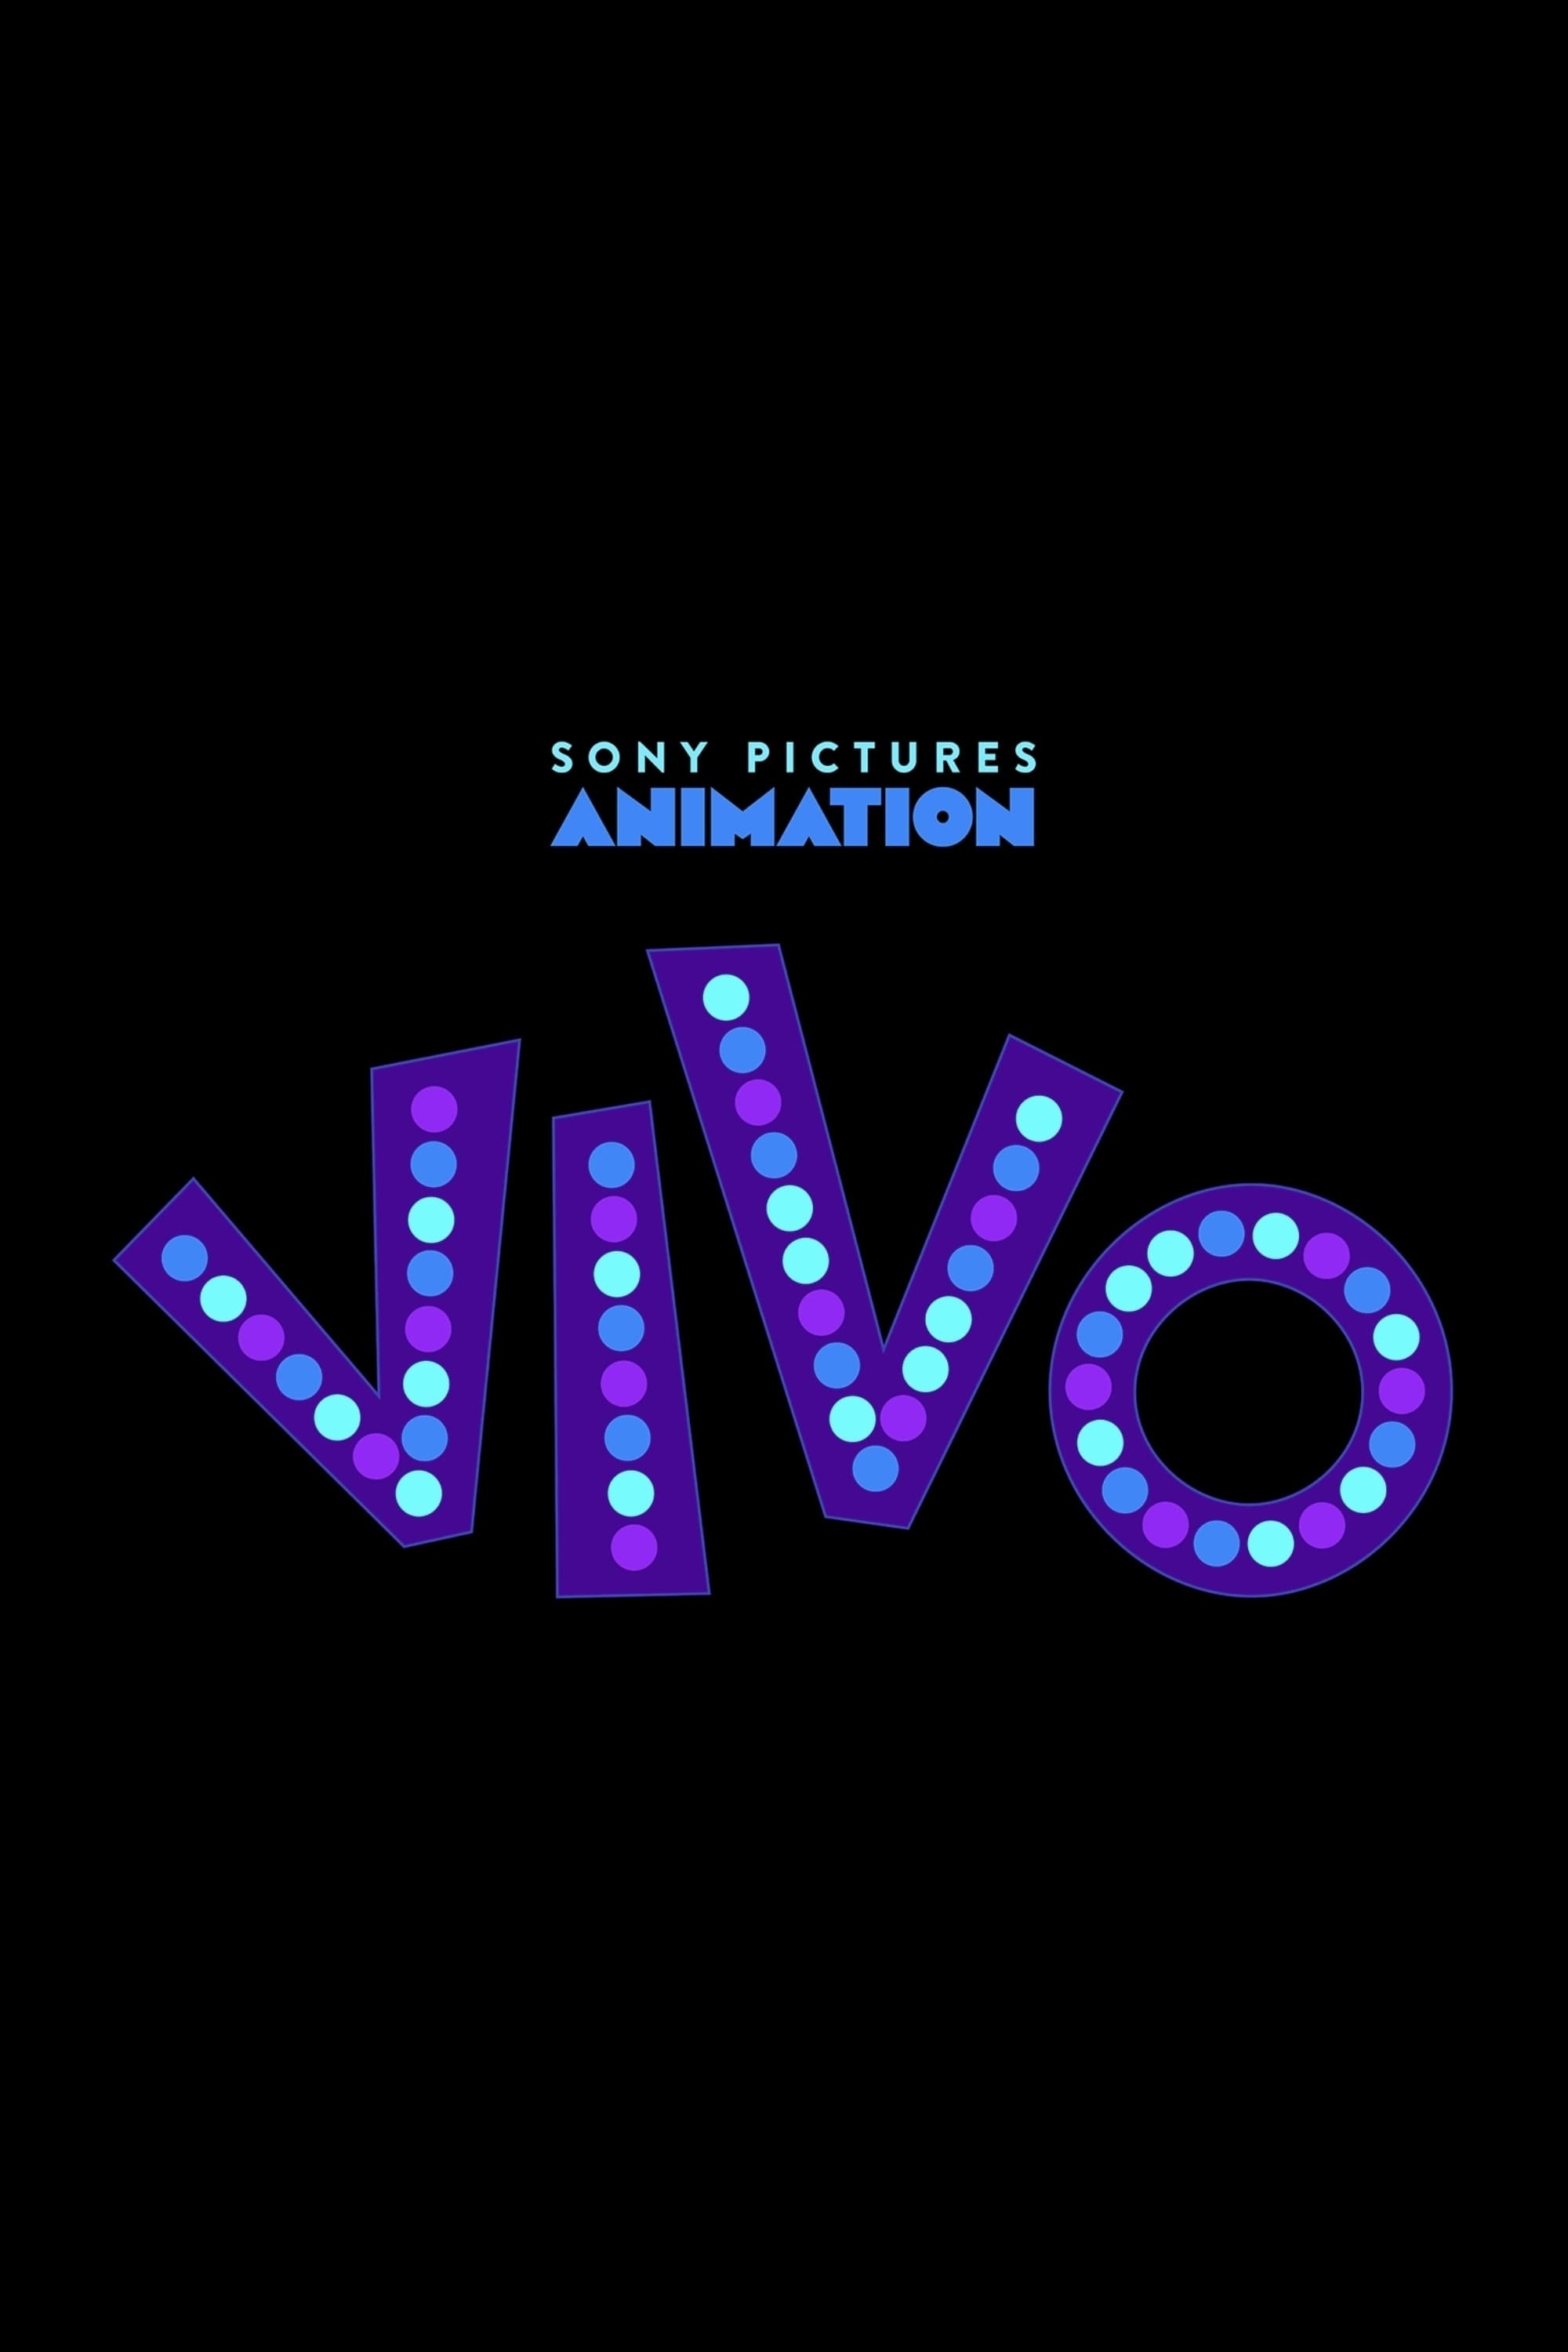 Vivo movie, Top free wallpapers, Movie backgrounds, Vibrant visual, 2000x3000 HD Handy